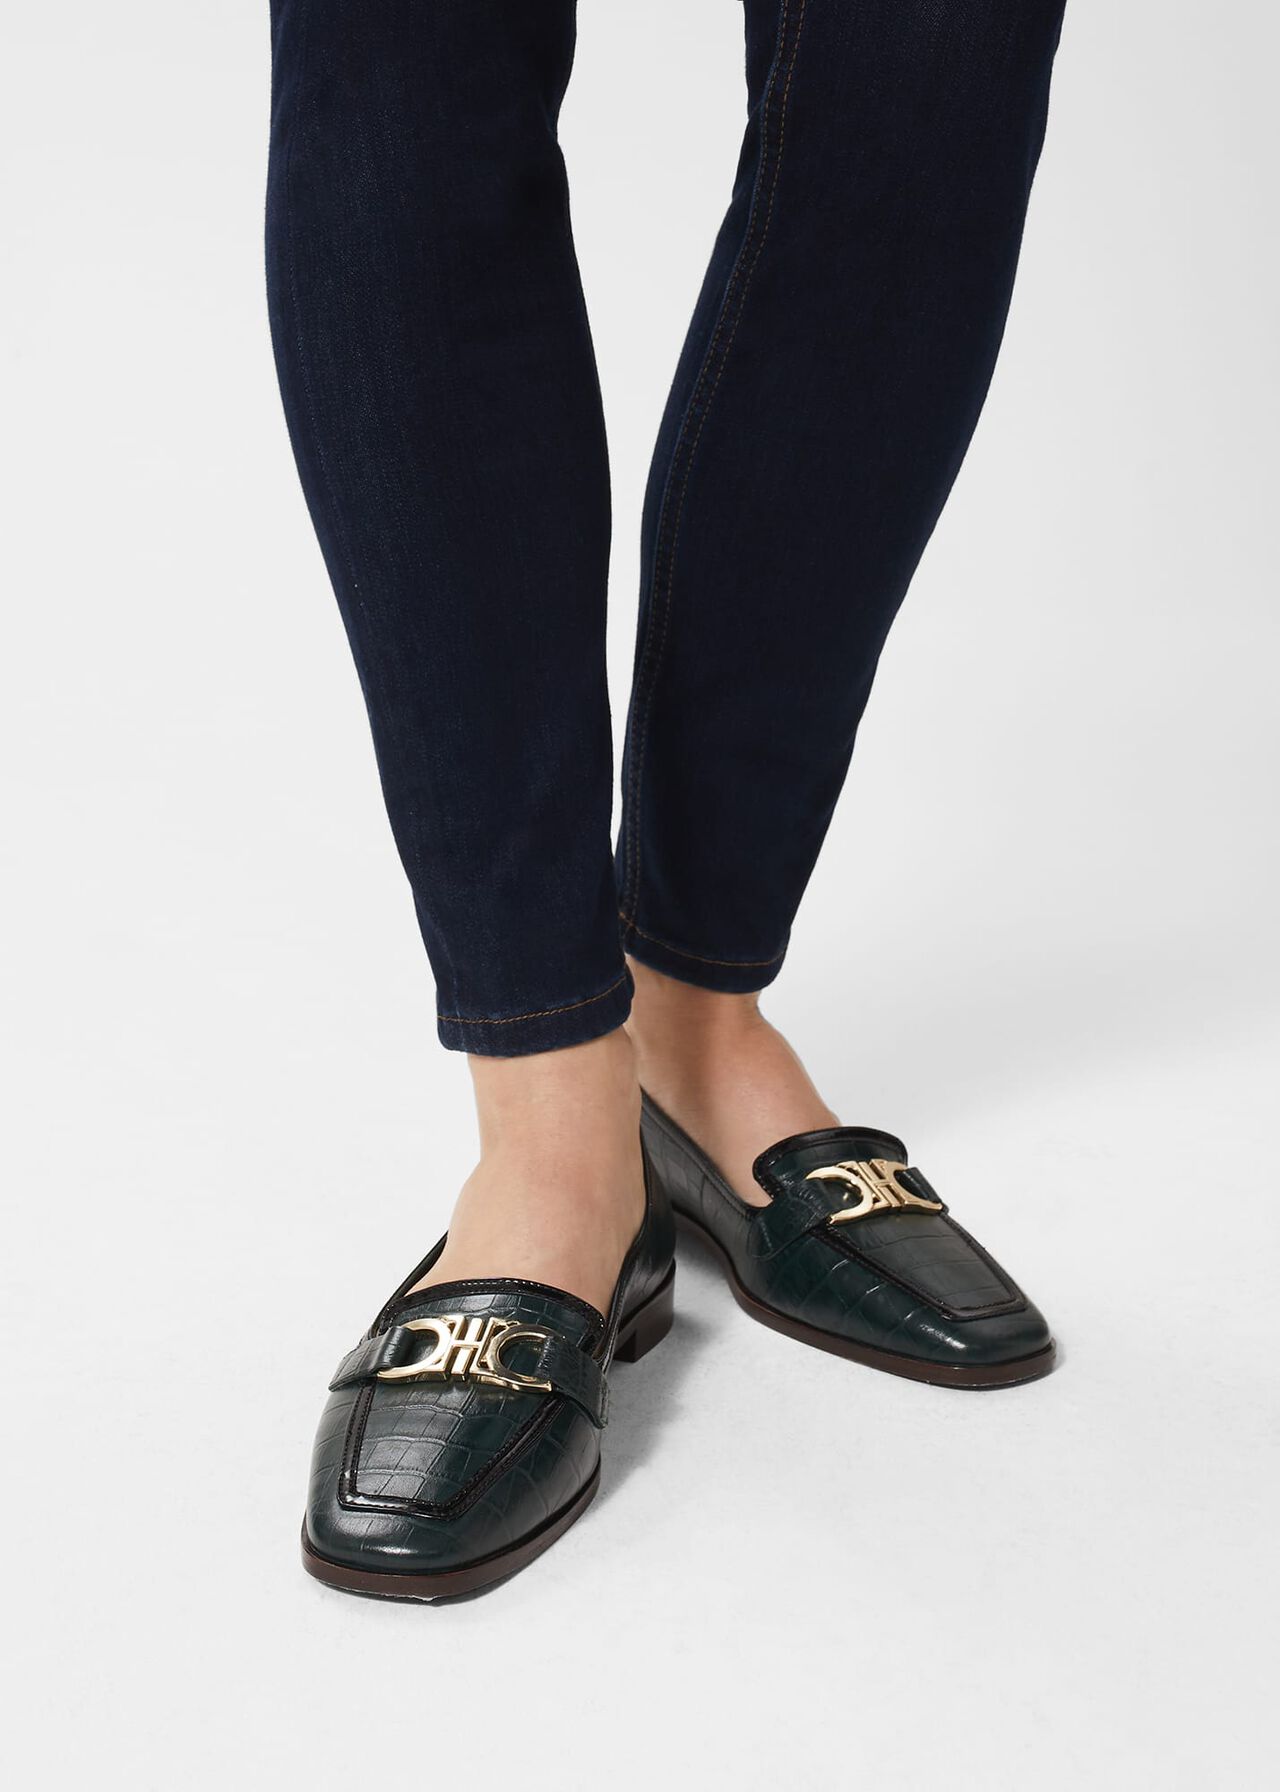 Sia Loafer, Forest Green, hi-res